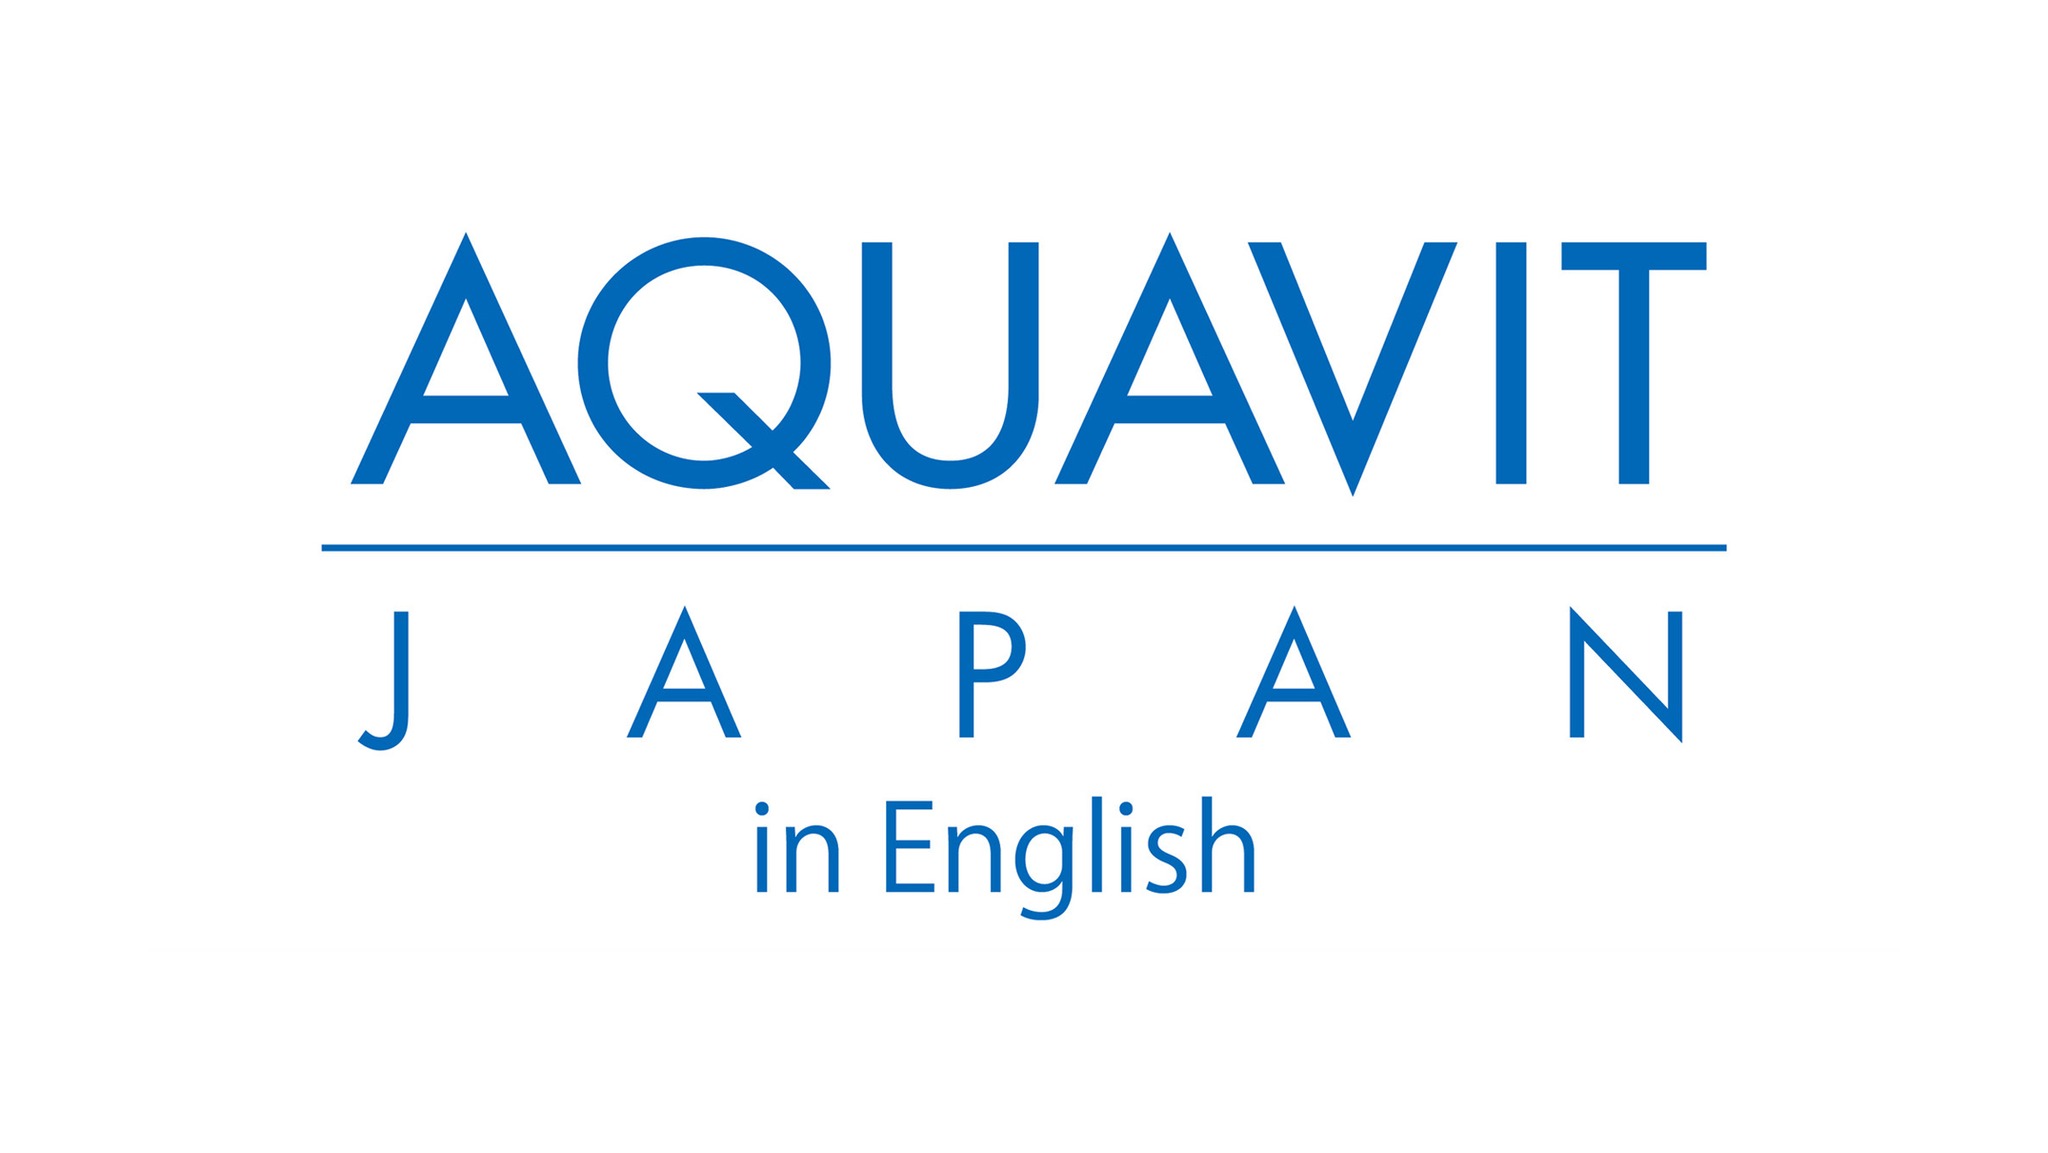 AQUAVIT JAPAN in English ― Delicacies from Nordic countries.